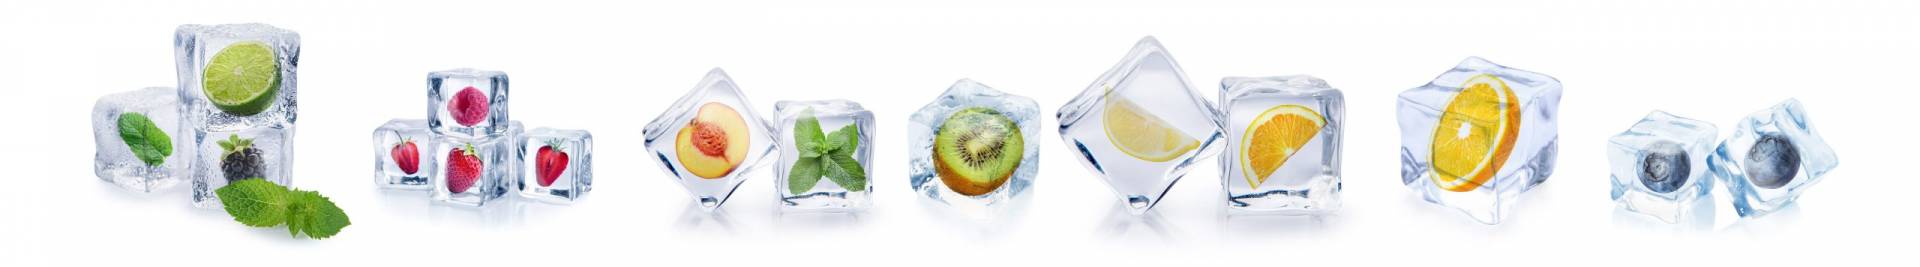 Set of ice cubes with different berries and fruits on white back